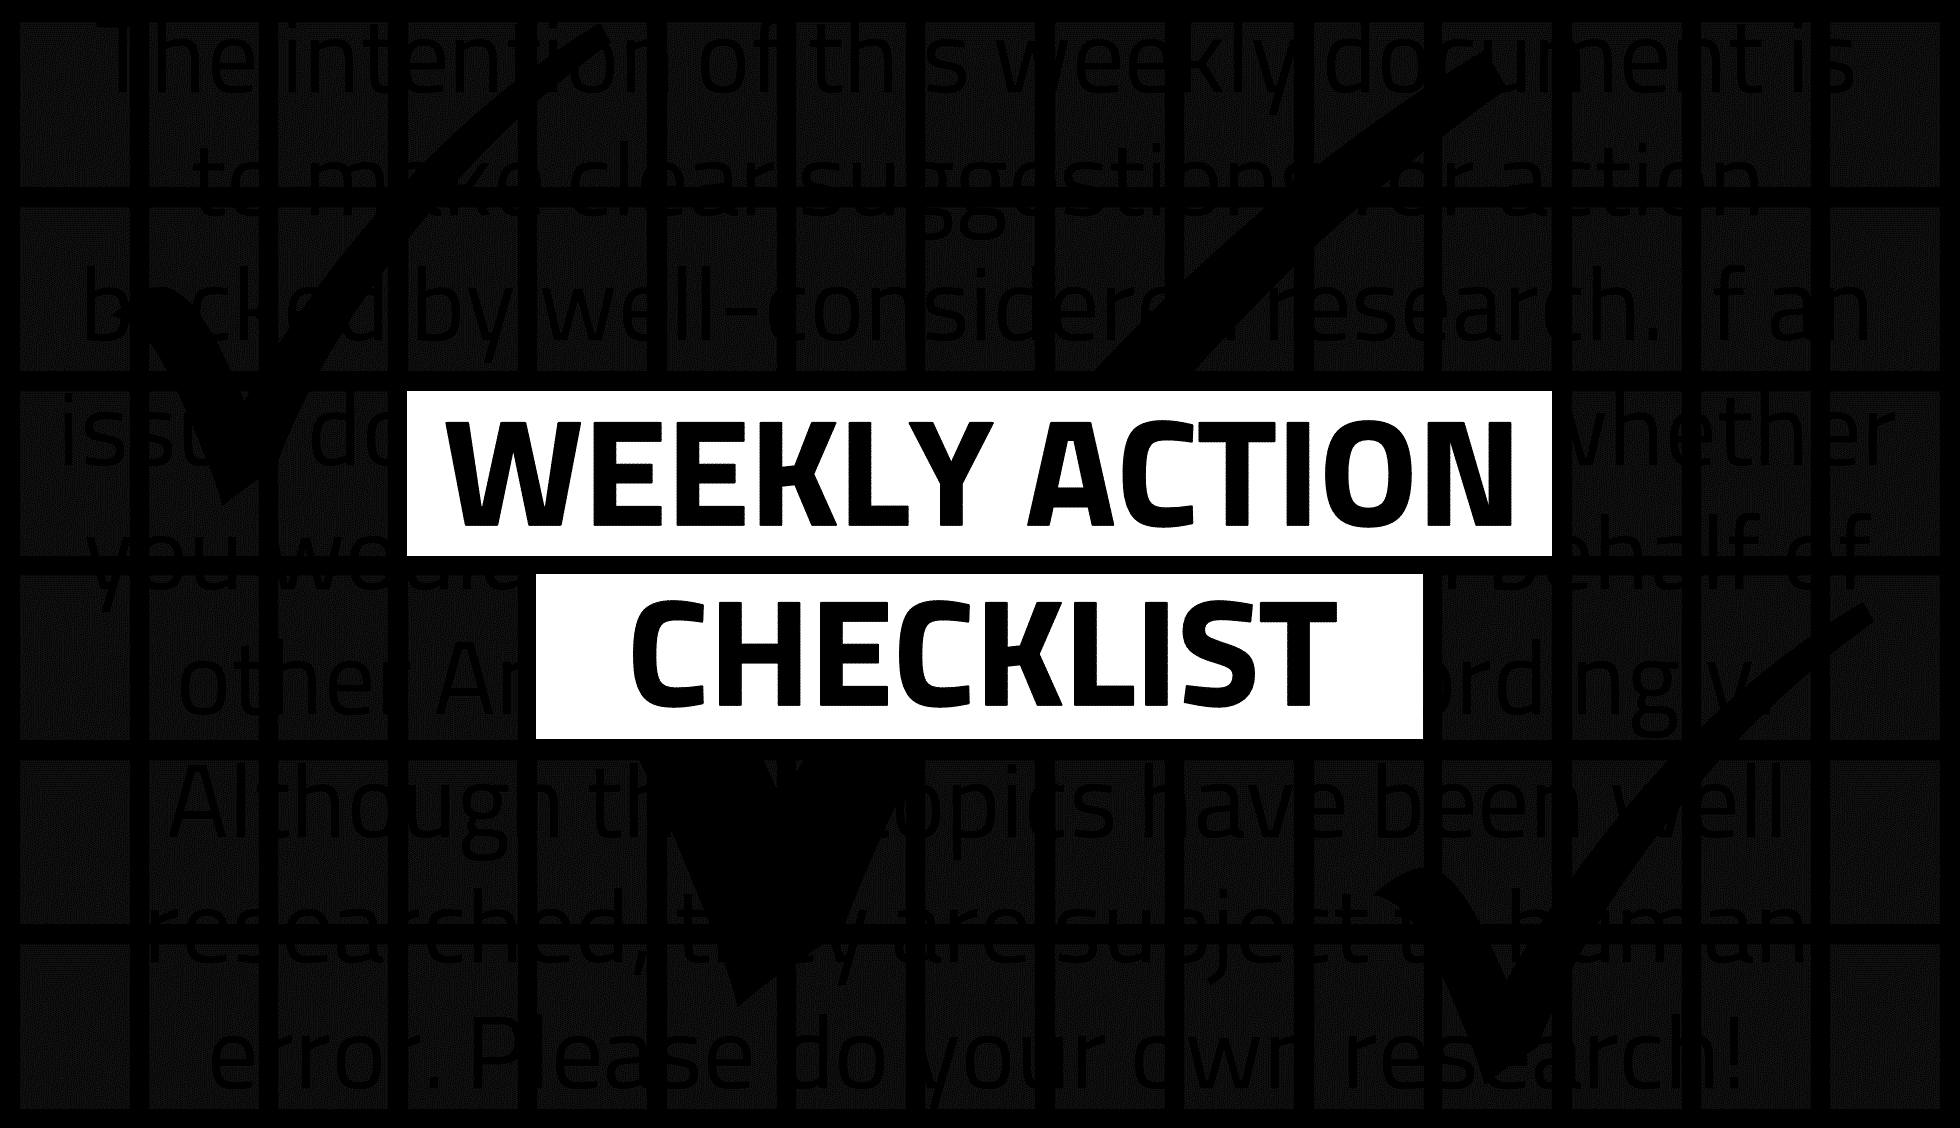 What to Do This Week of May 7, 2017